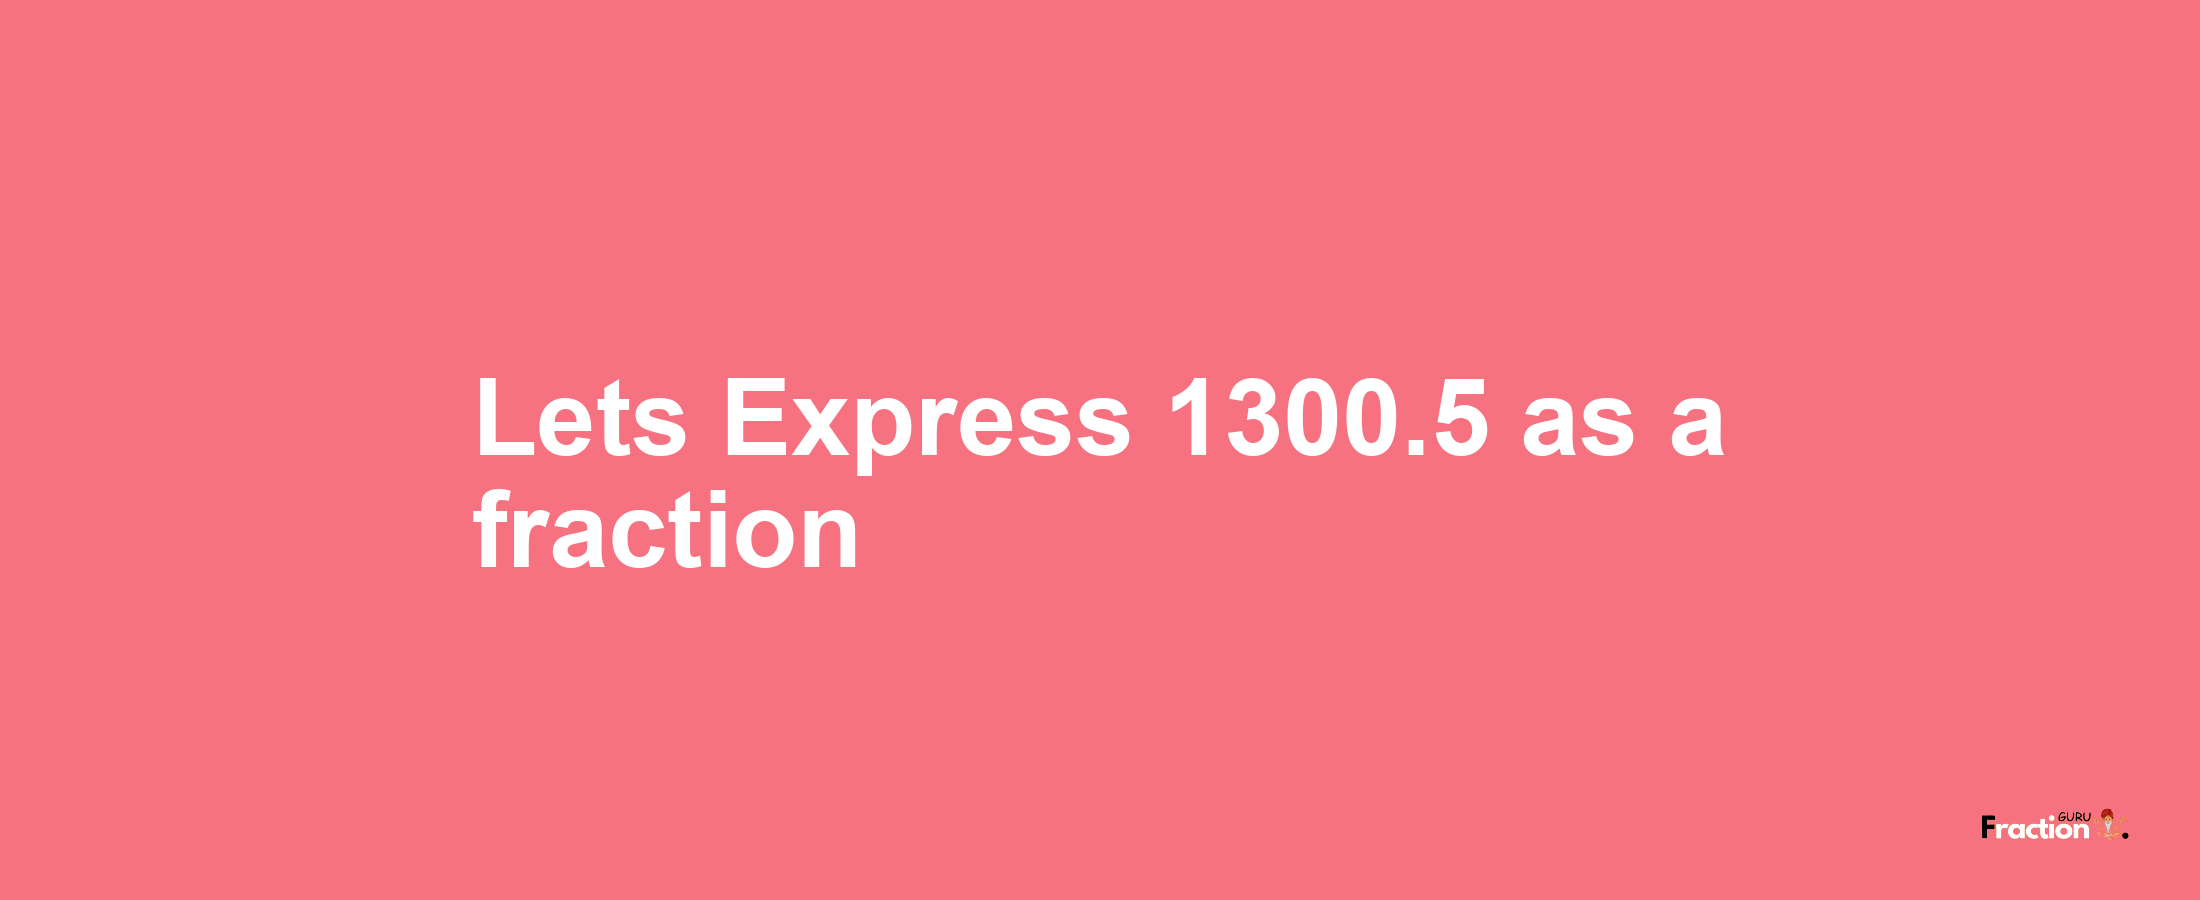 Lets Express 1300.5 as afraction